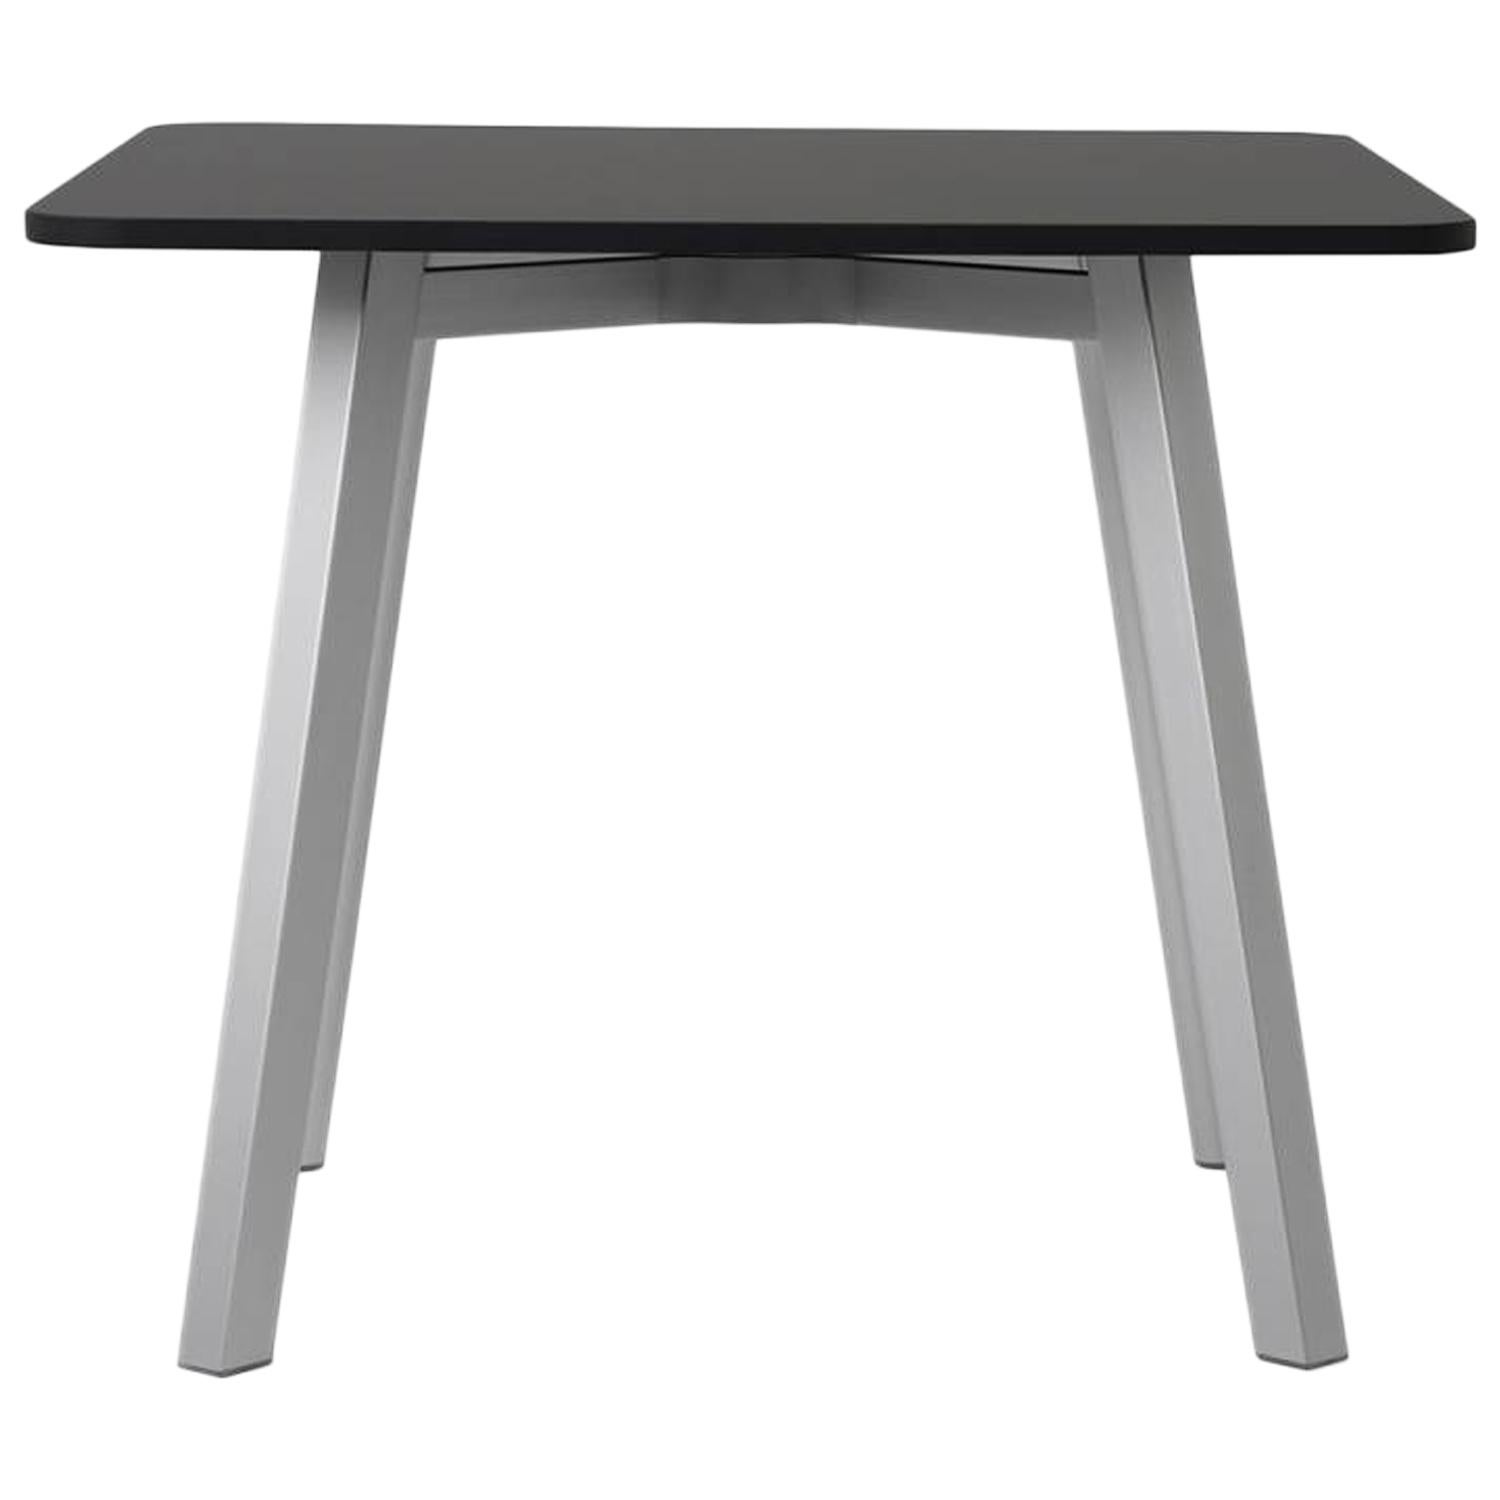 Emeco Su Low Table in Natural Aluminum with Black Laminate Top by Nendo